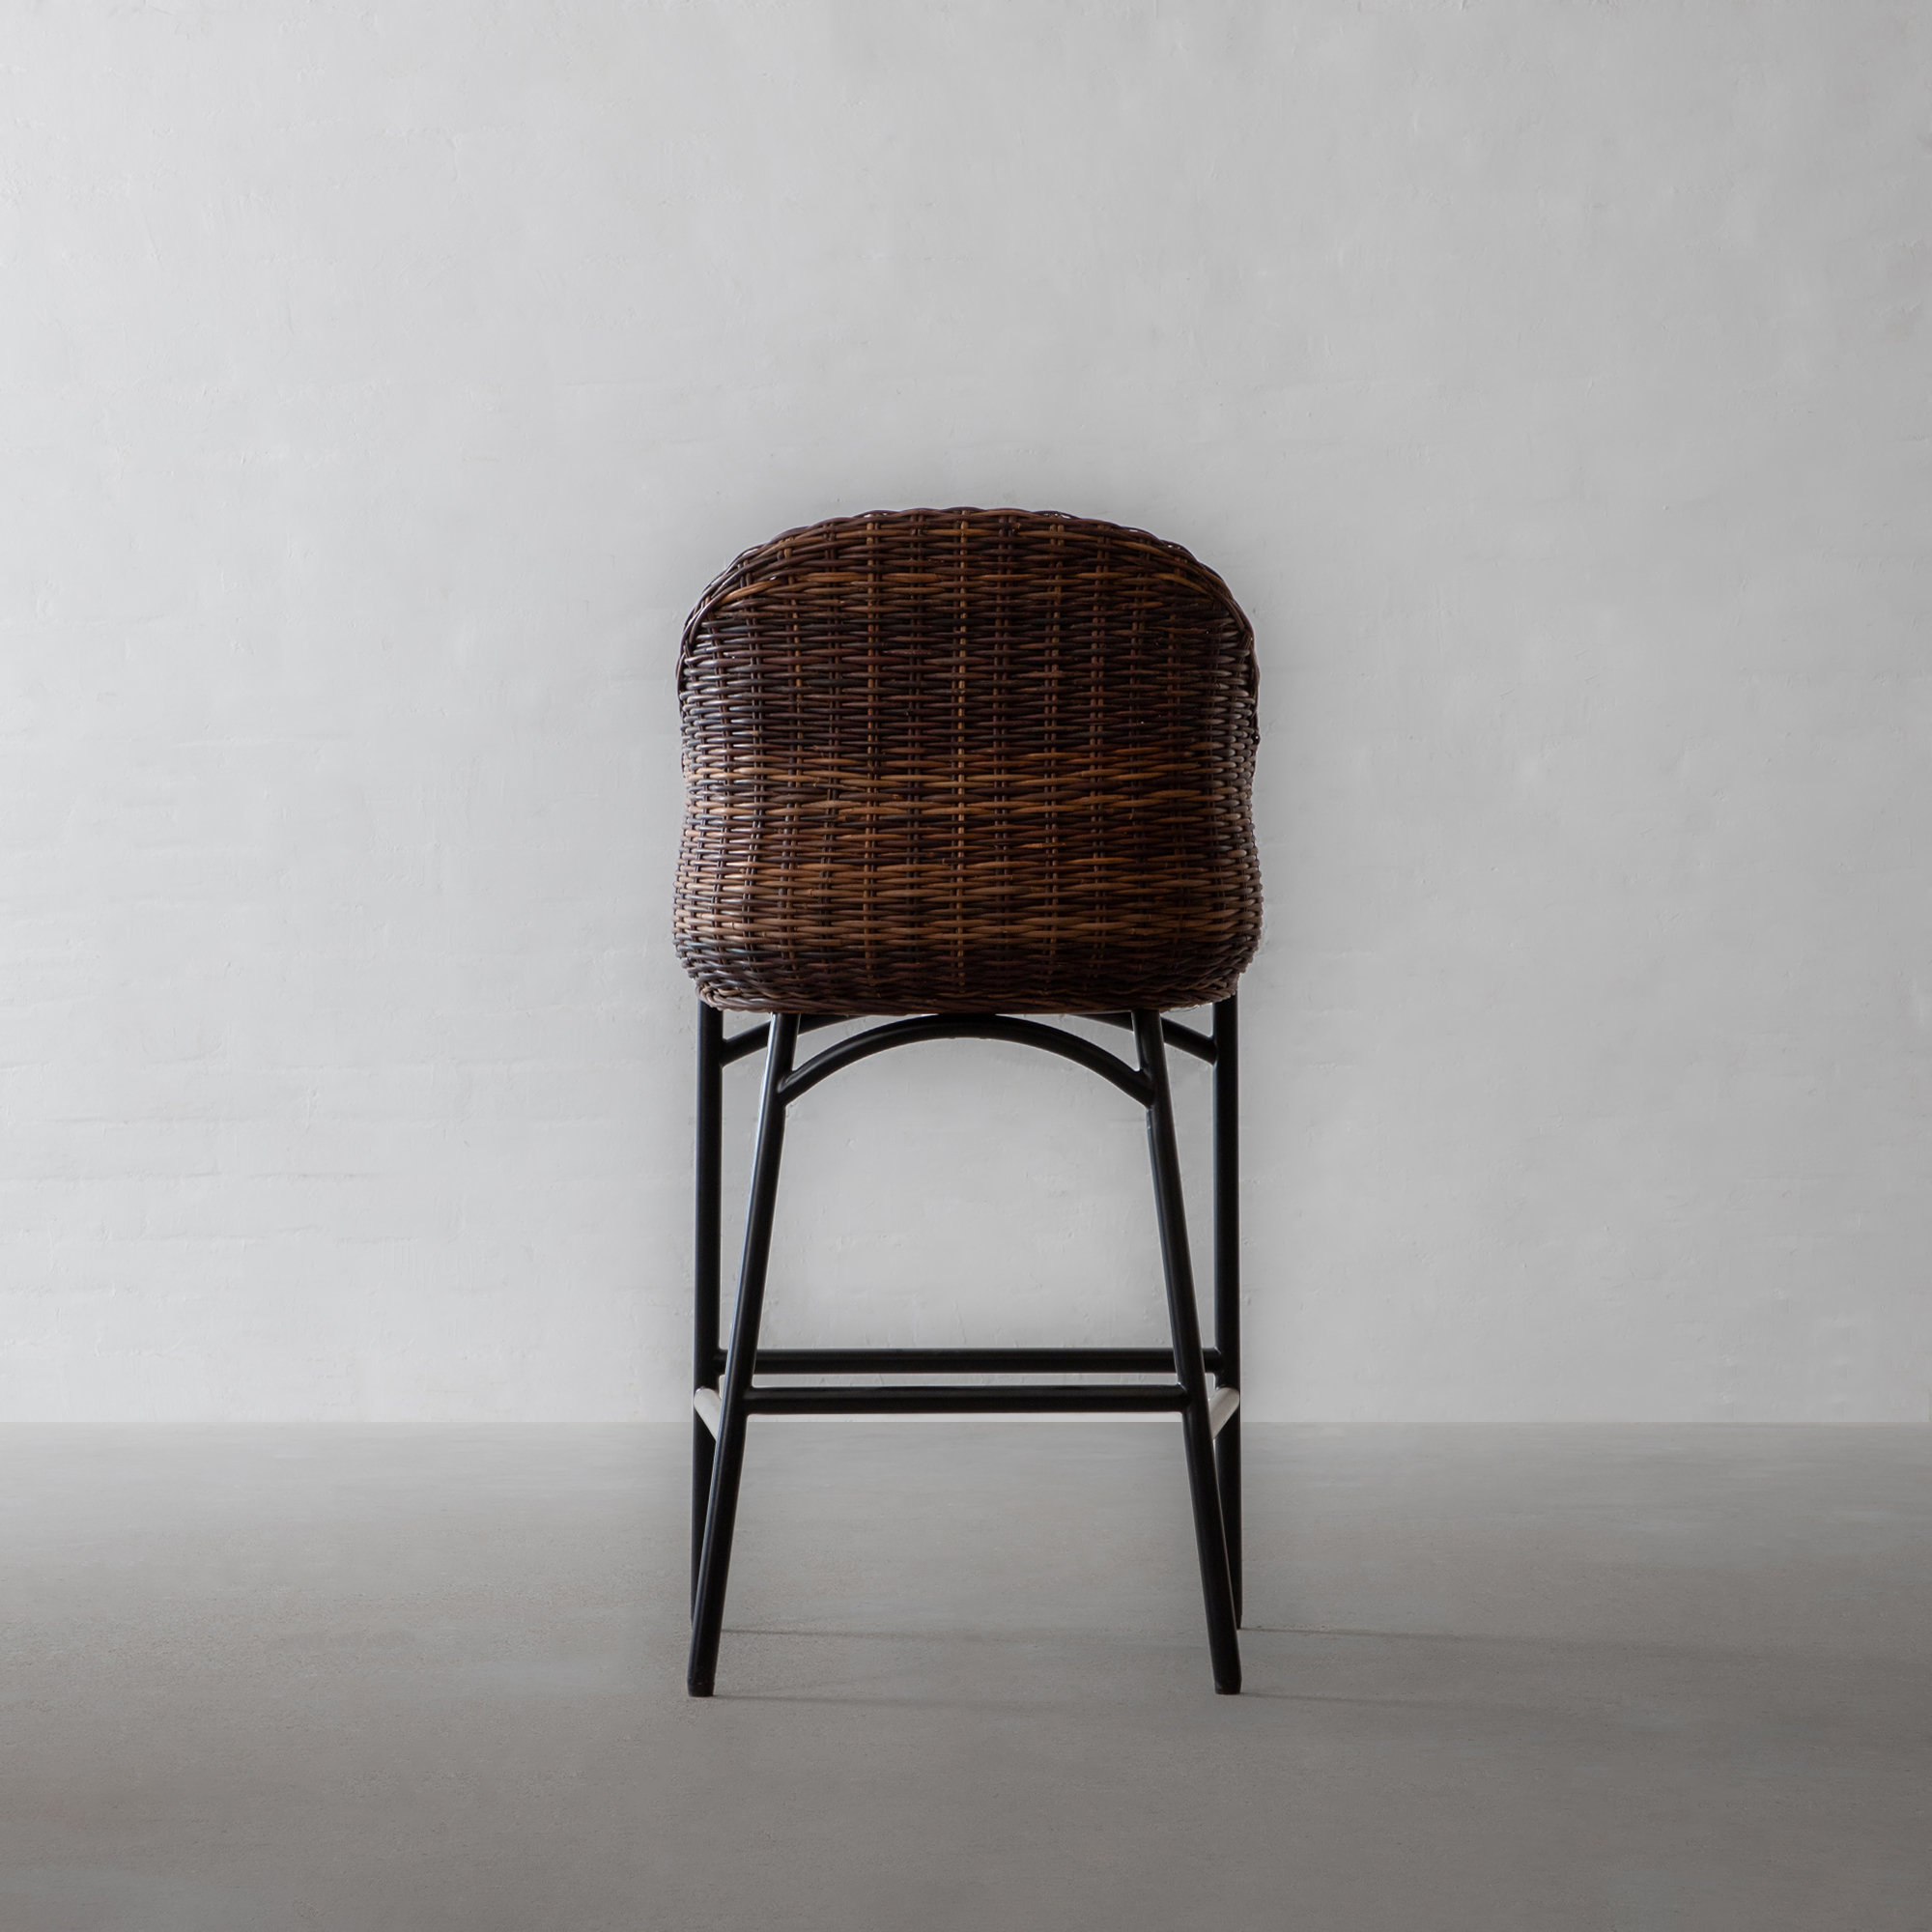 The Brussels Bar Chair